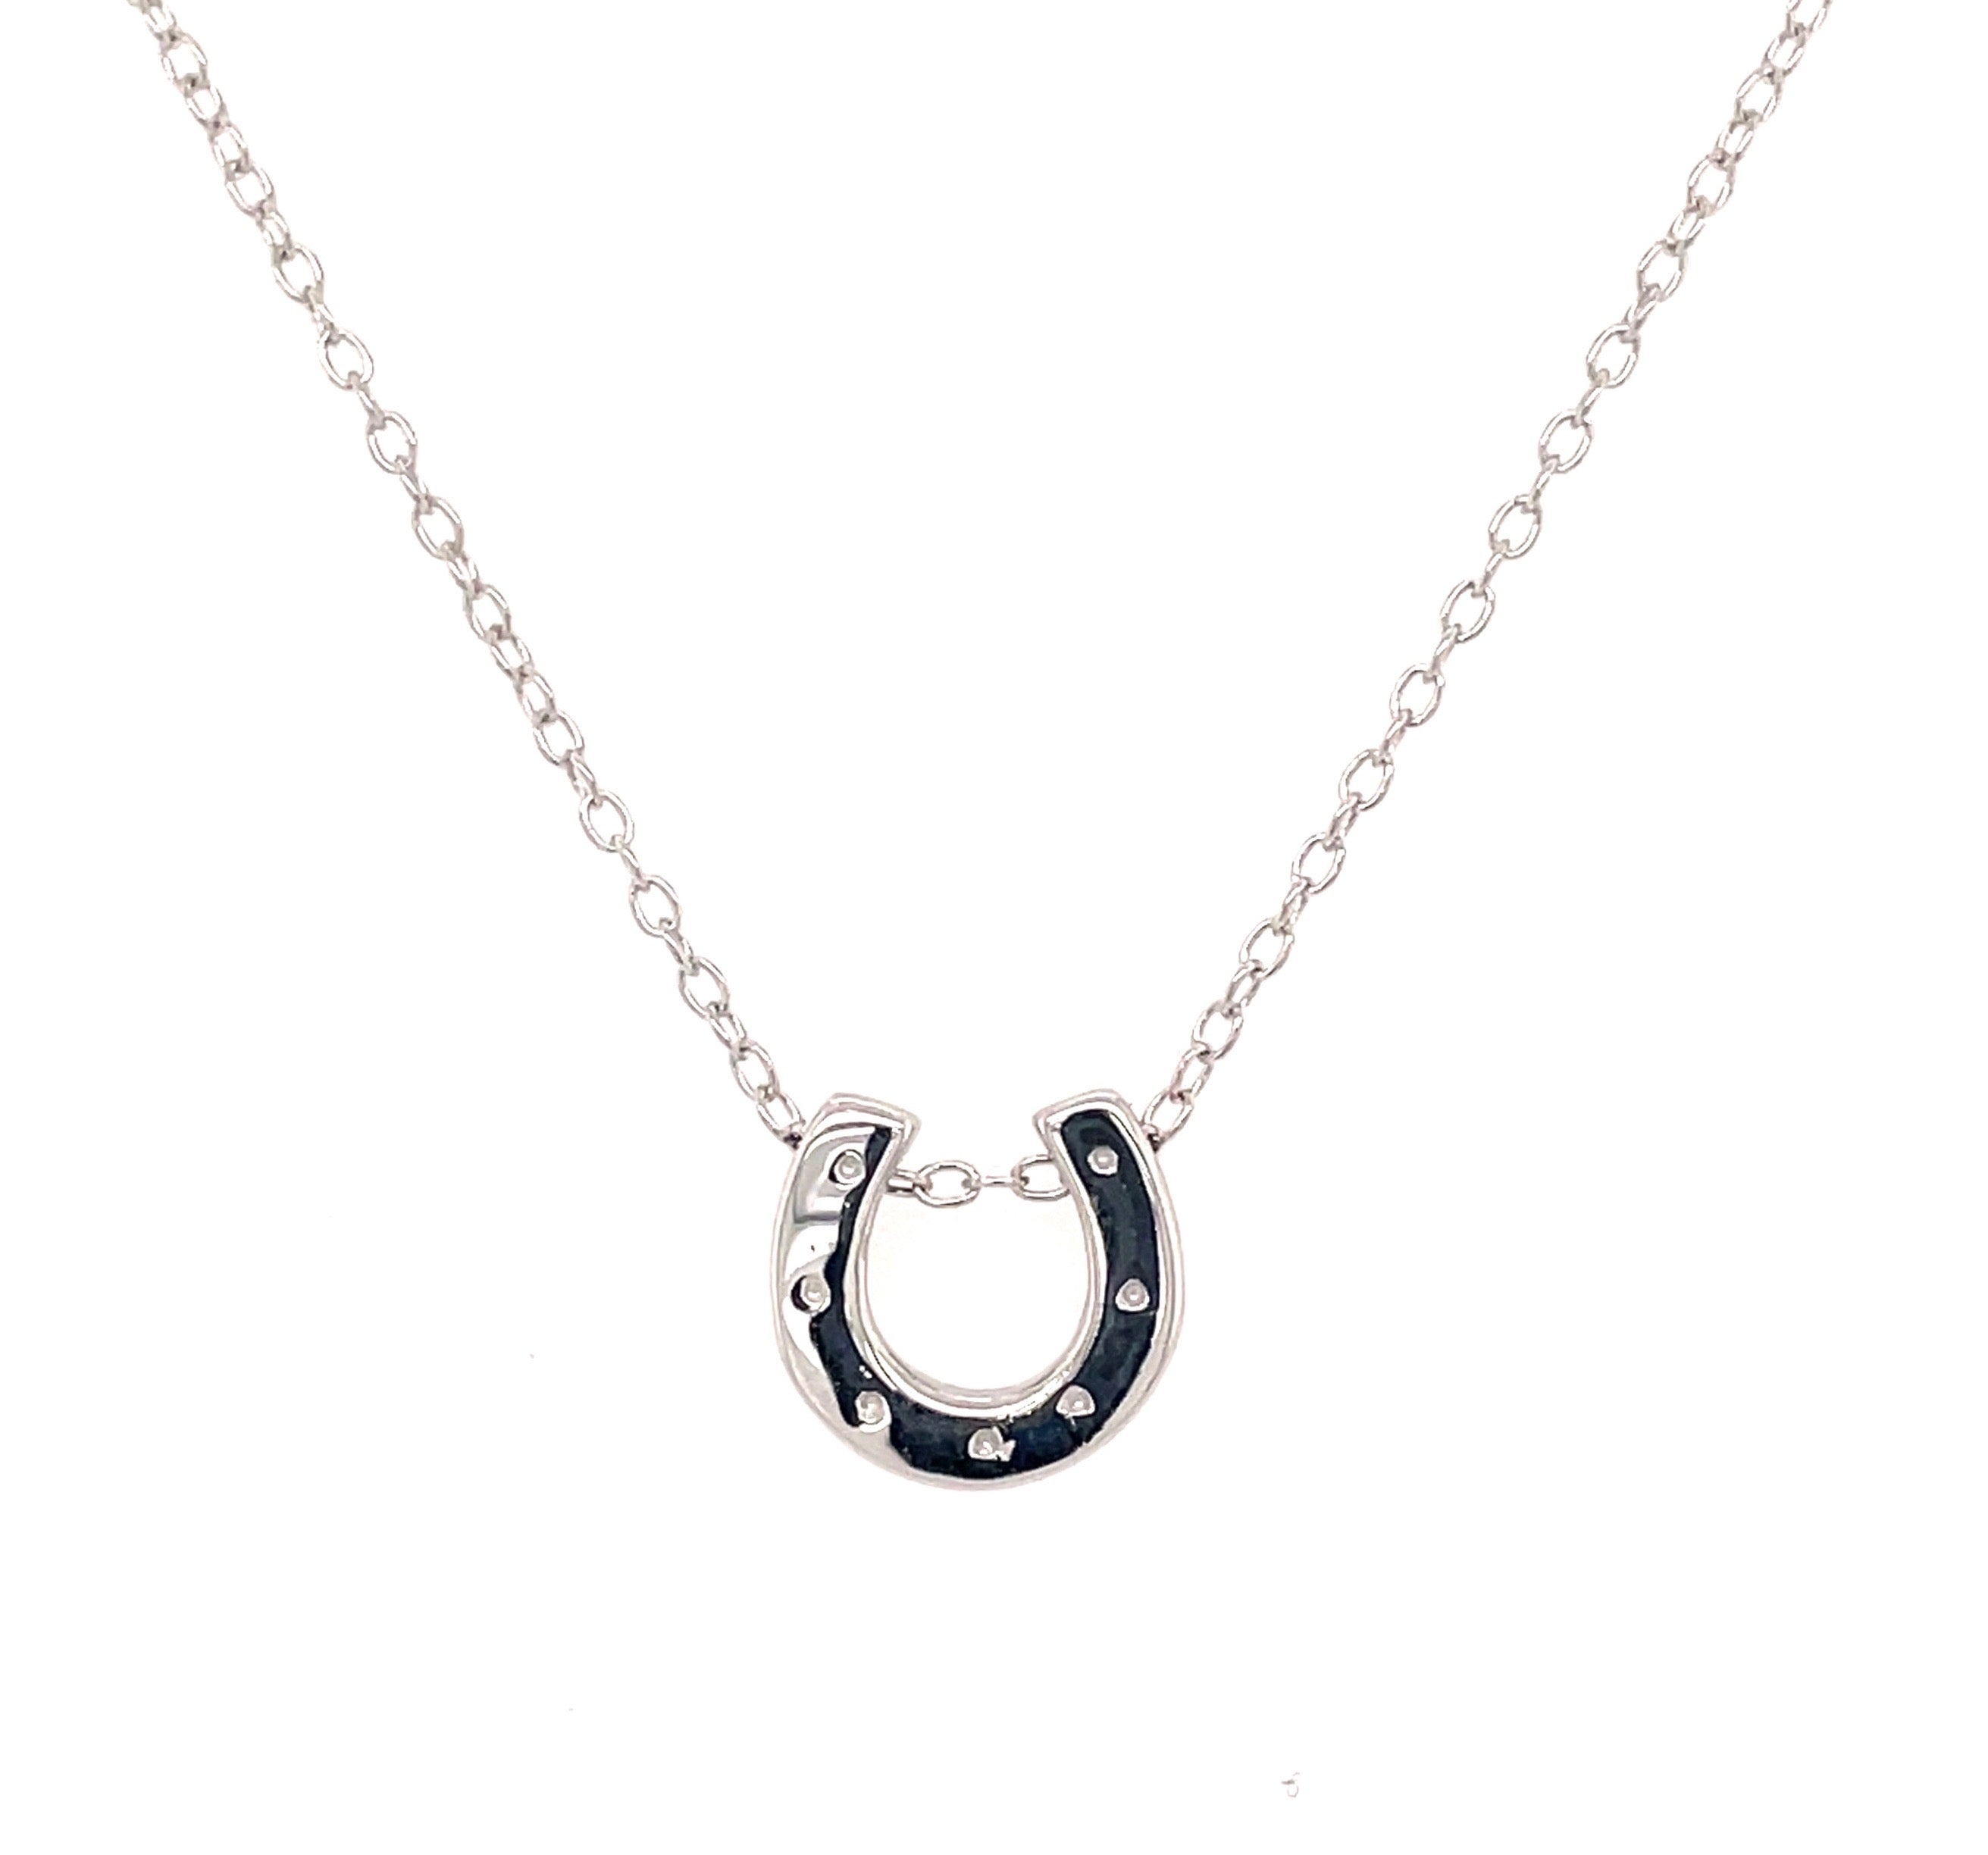 Horseshoe necklace with nail holes sterling silver